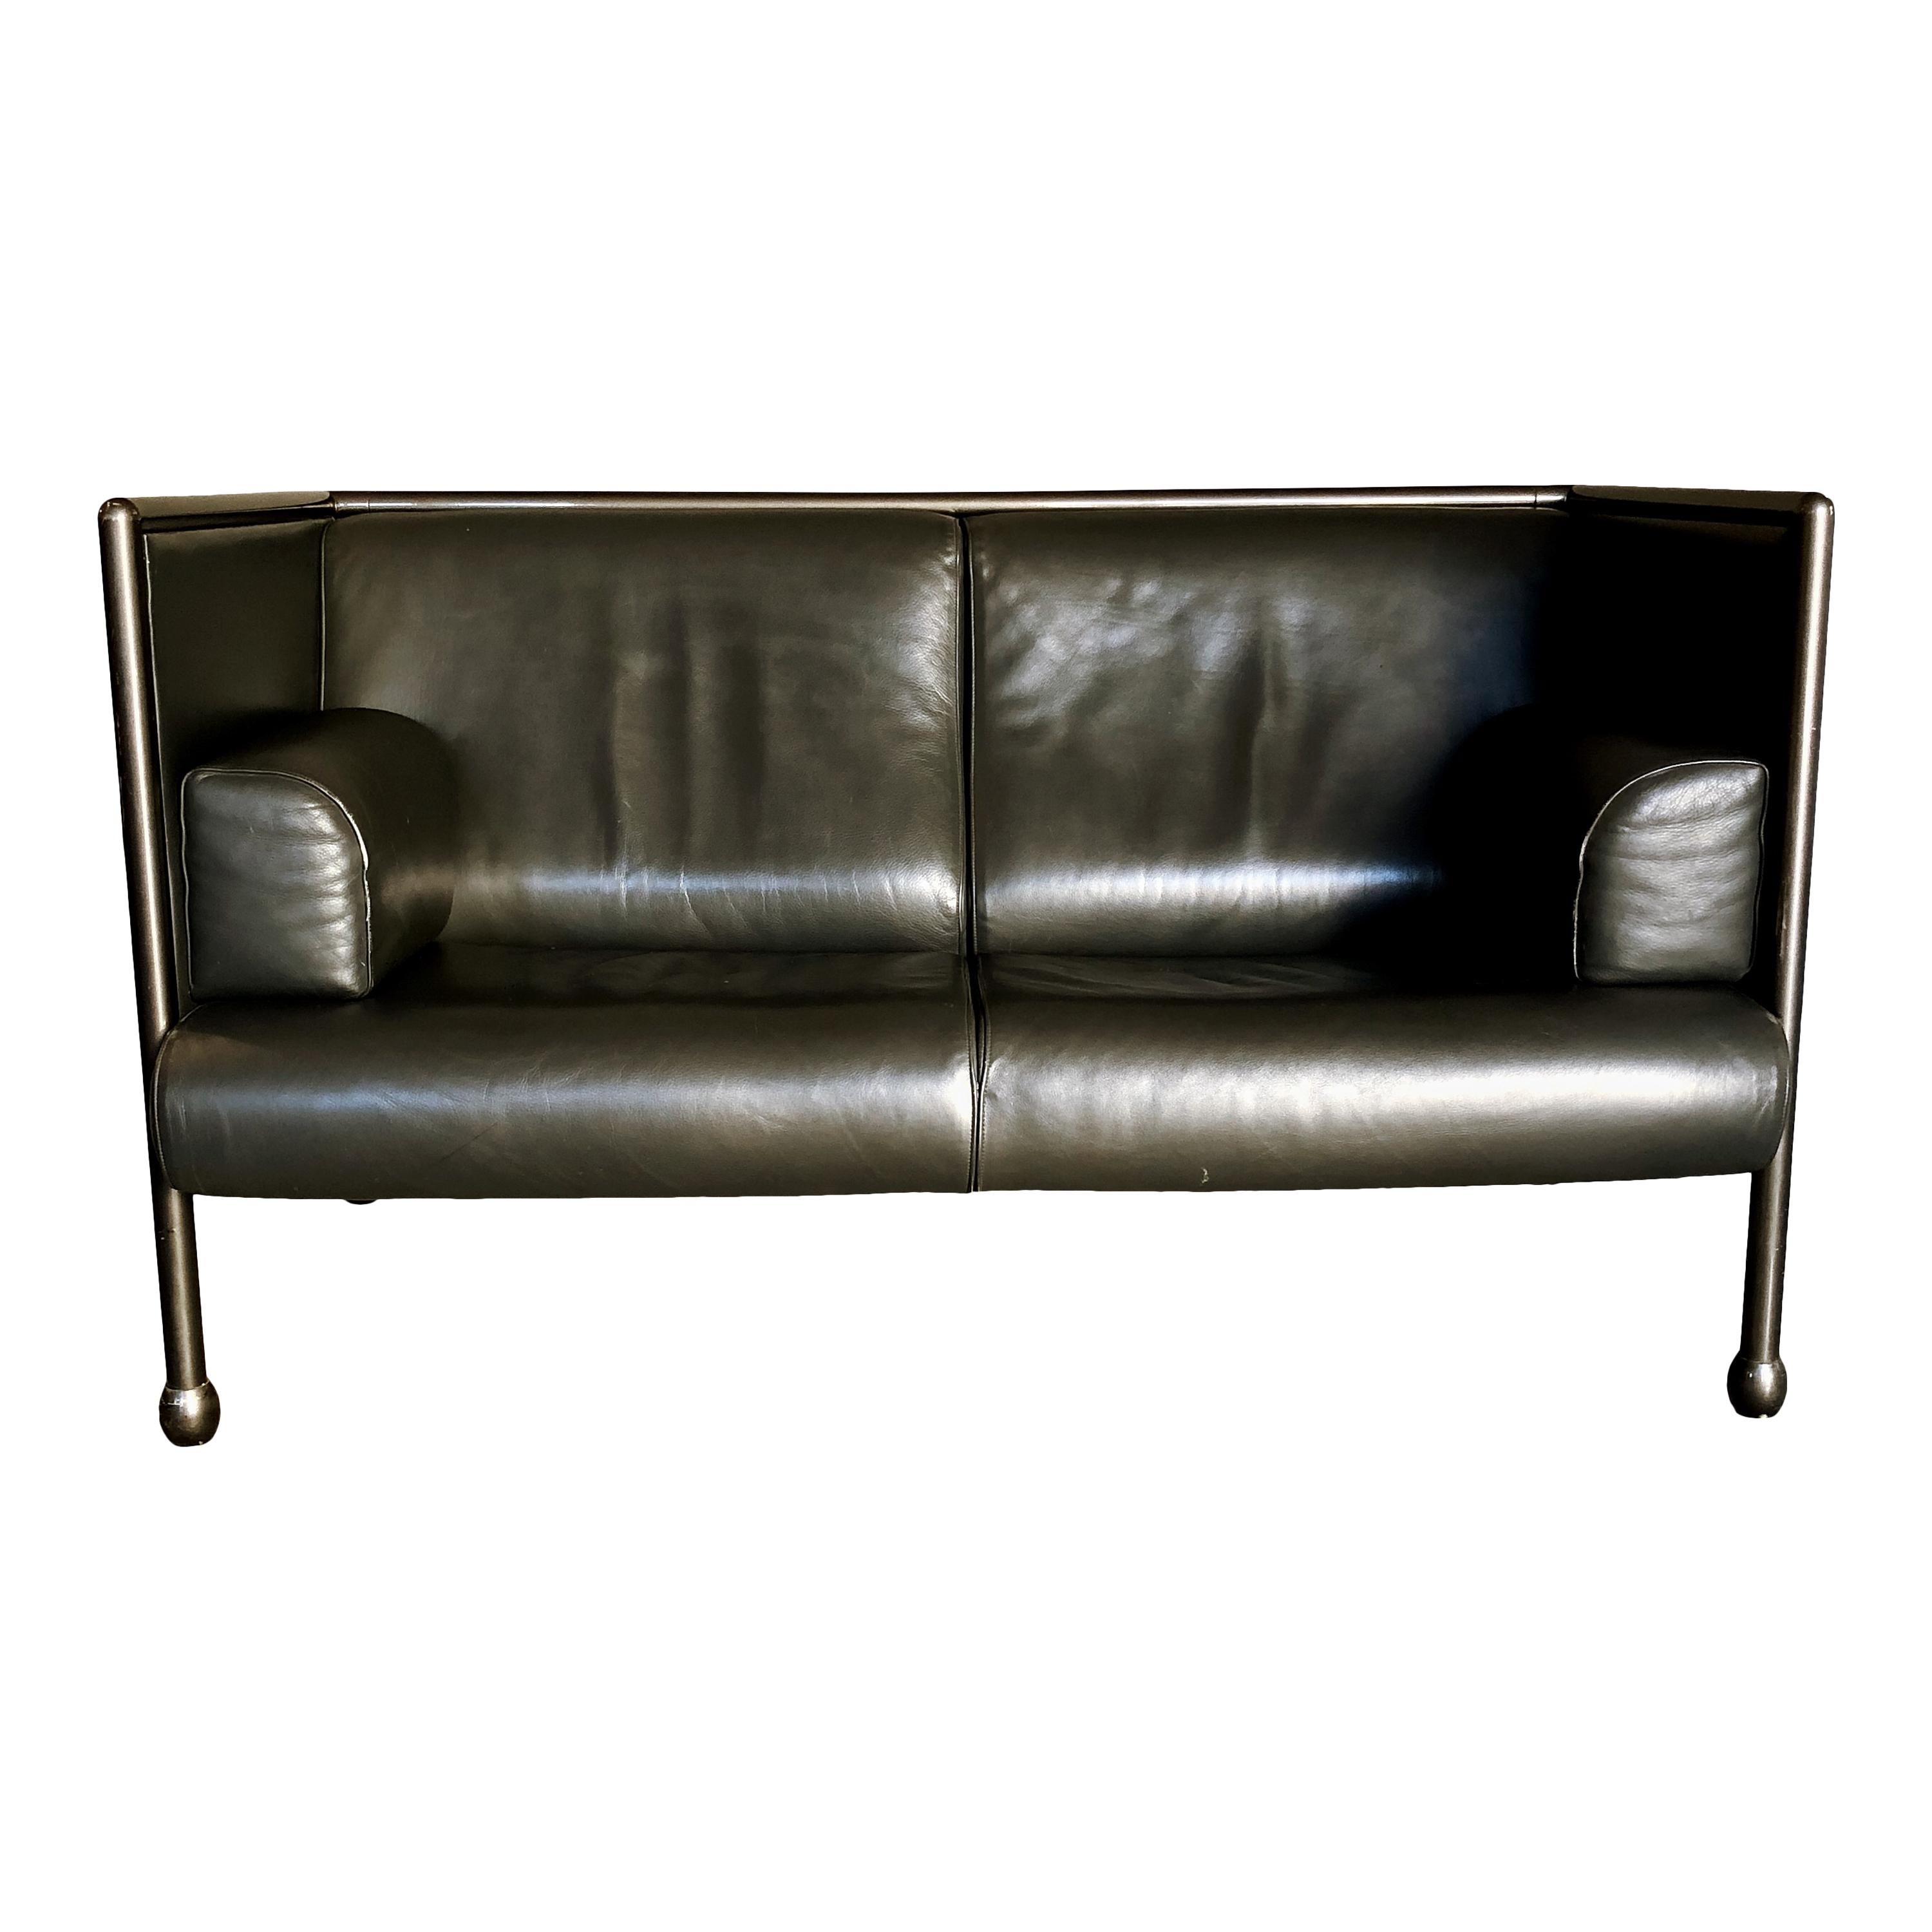 Post-Modern Ettore Sottsass Postmodern Iron and Black Leather Danube Sofa for Cassina, 1992 For Sale